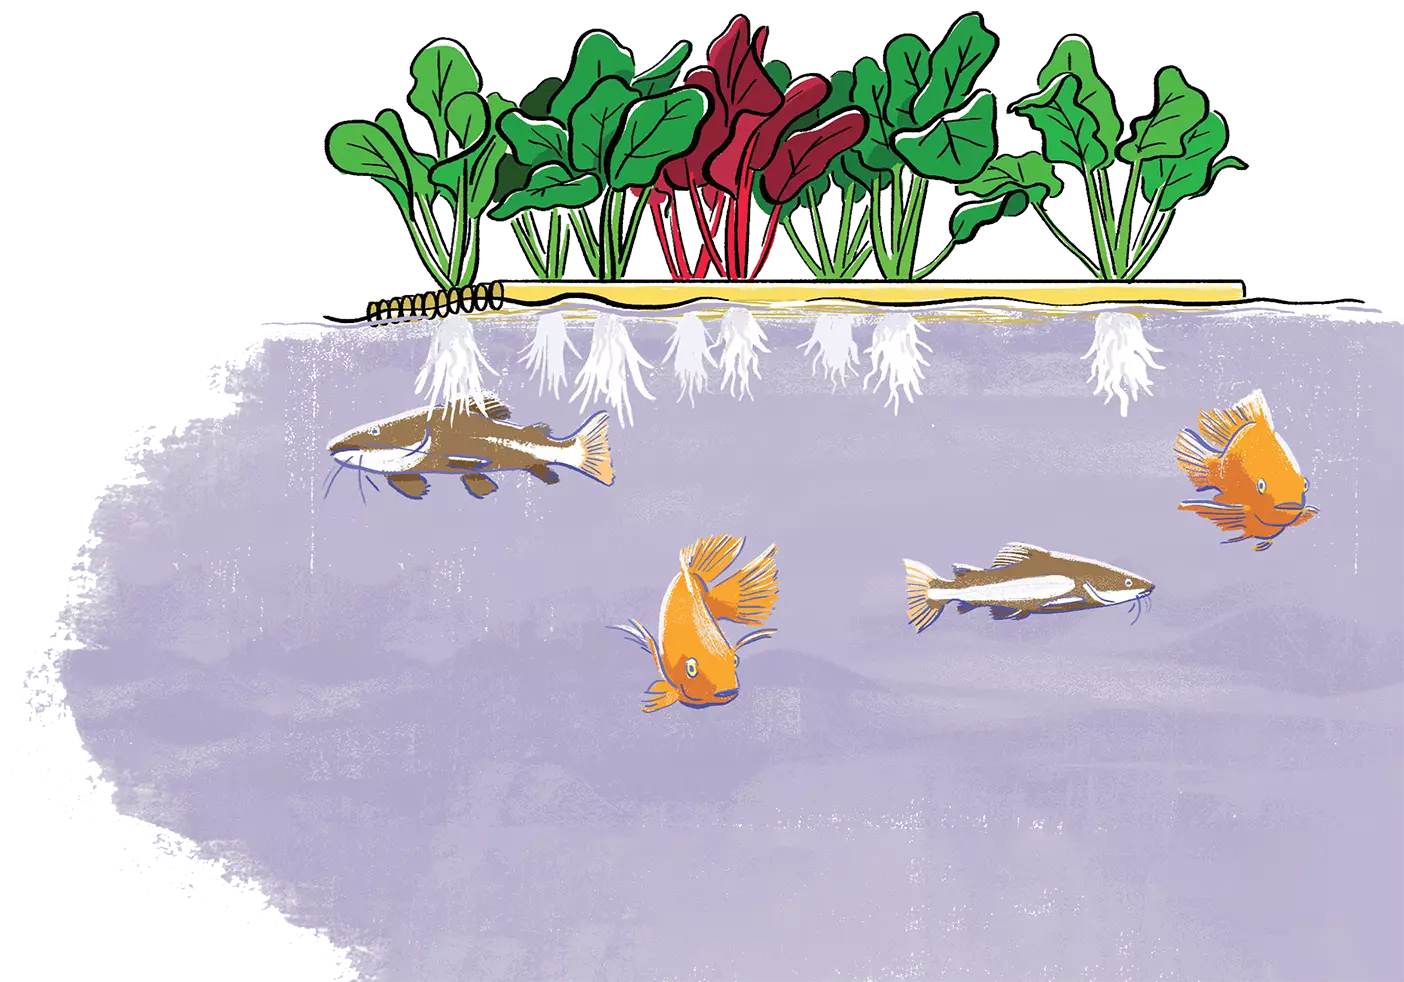 An illustration of an aquaponics system. Plants are growing on top of the water and fish are swimming underneath.